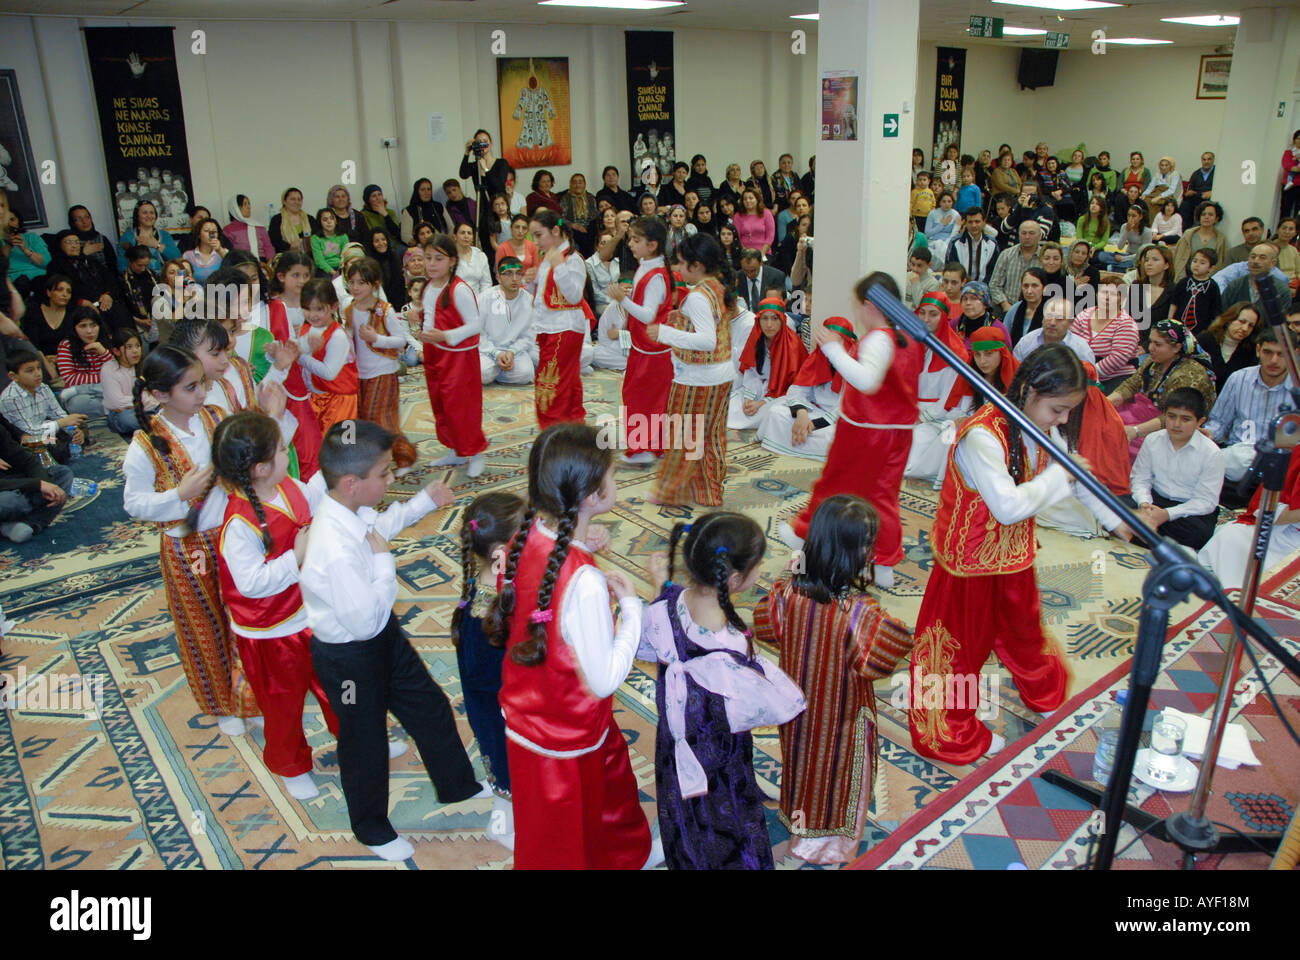 ETHNIC ALEVIS CHILDREN IN ALEVIS  CULTURAL CENTER DURING SEMAH CEREMONY IN NORTH LONDON Stock Photo